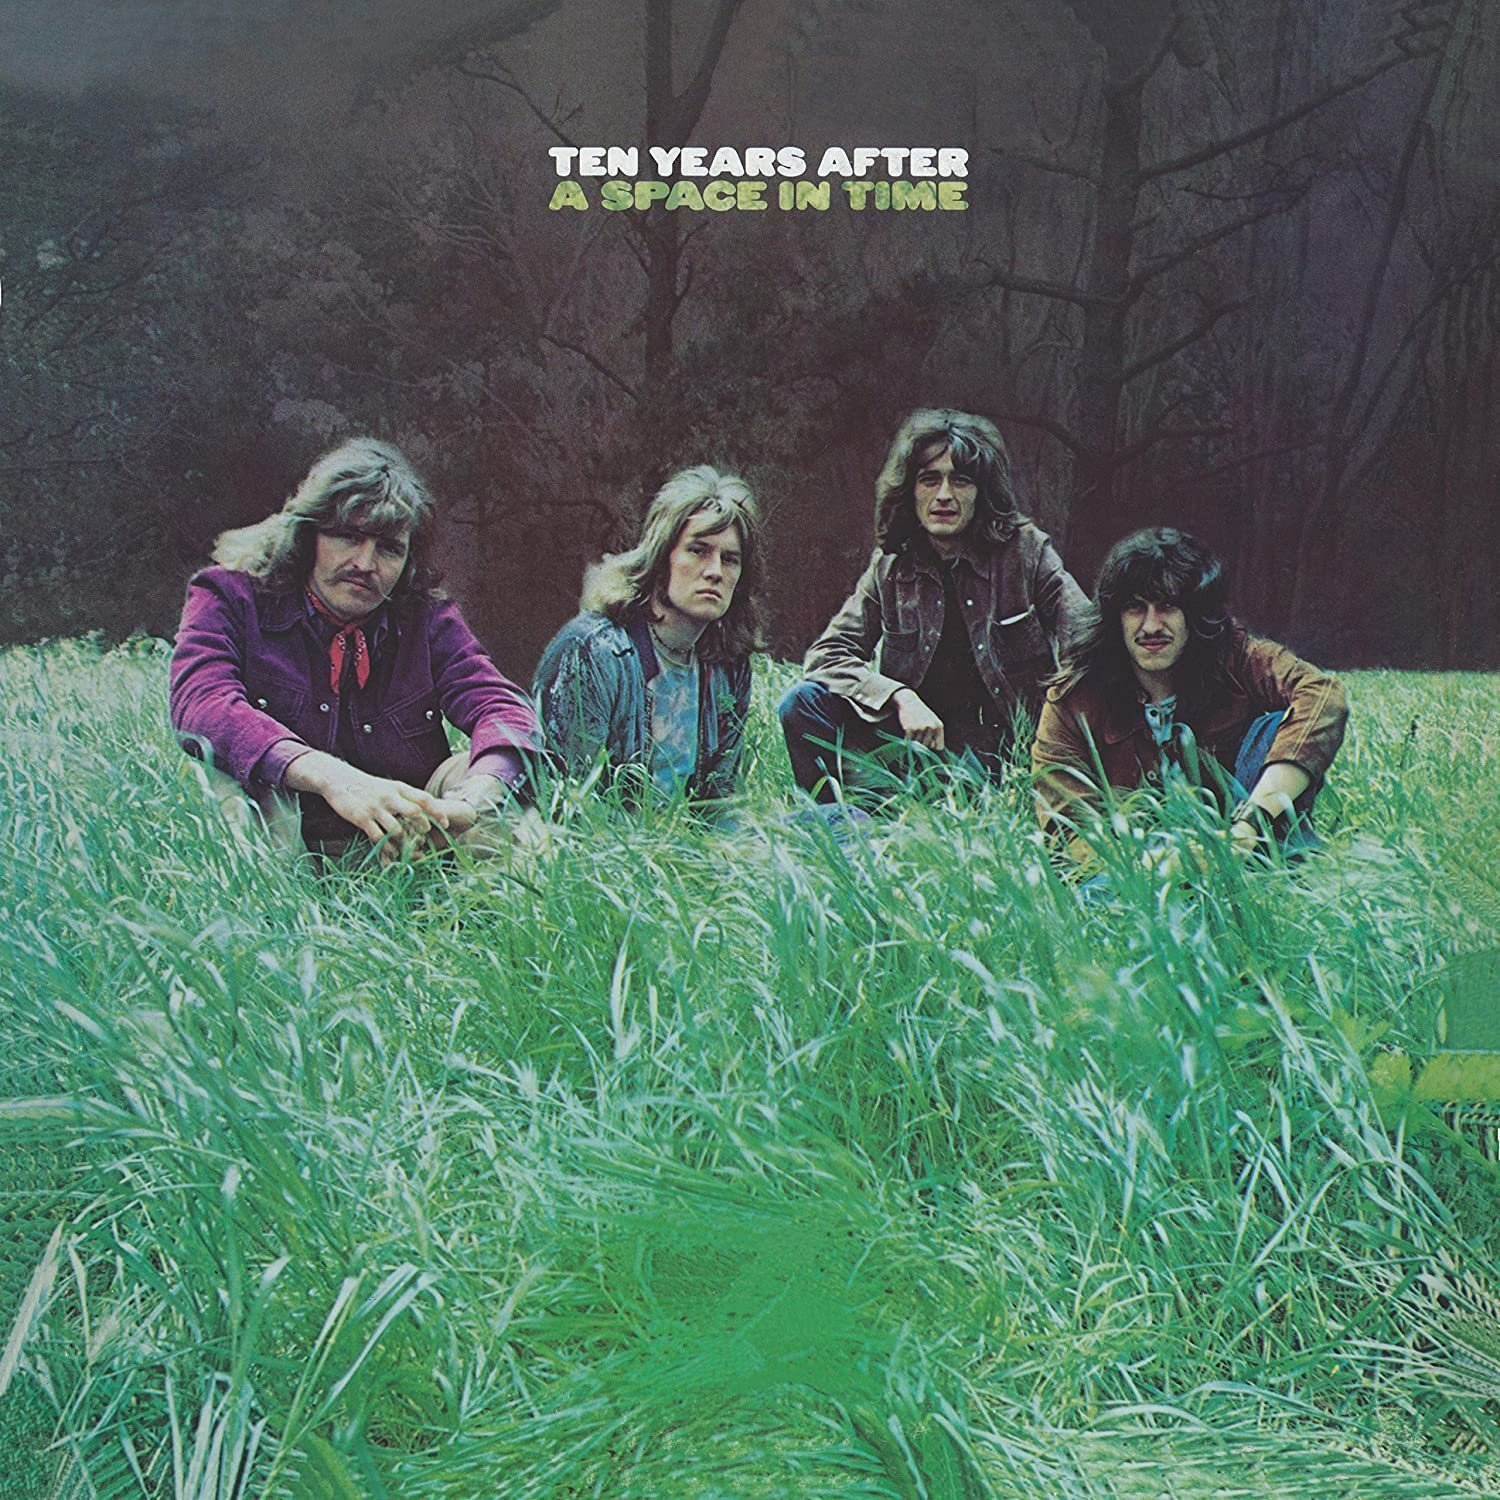 Disco de vinilo Ten Years After - A Space In Time (LP)